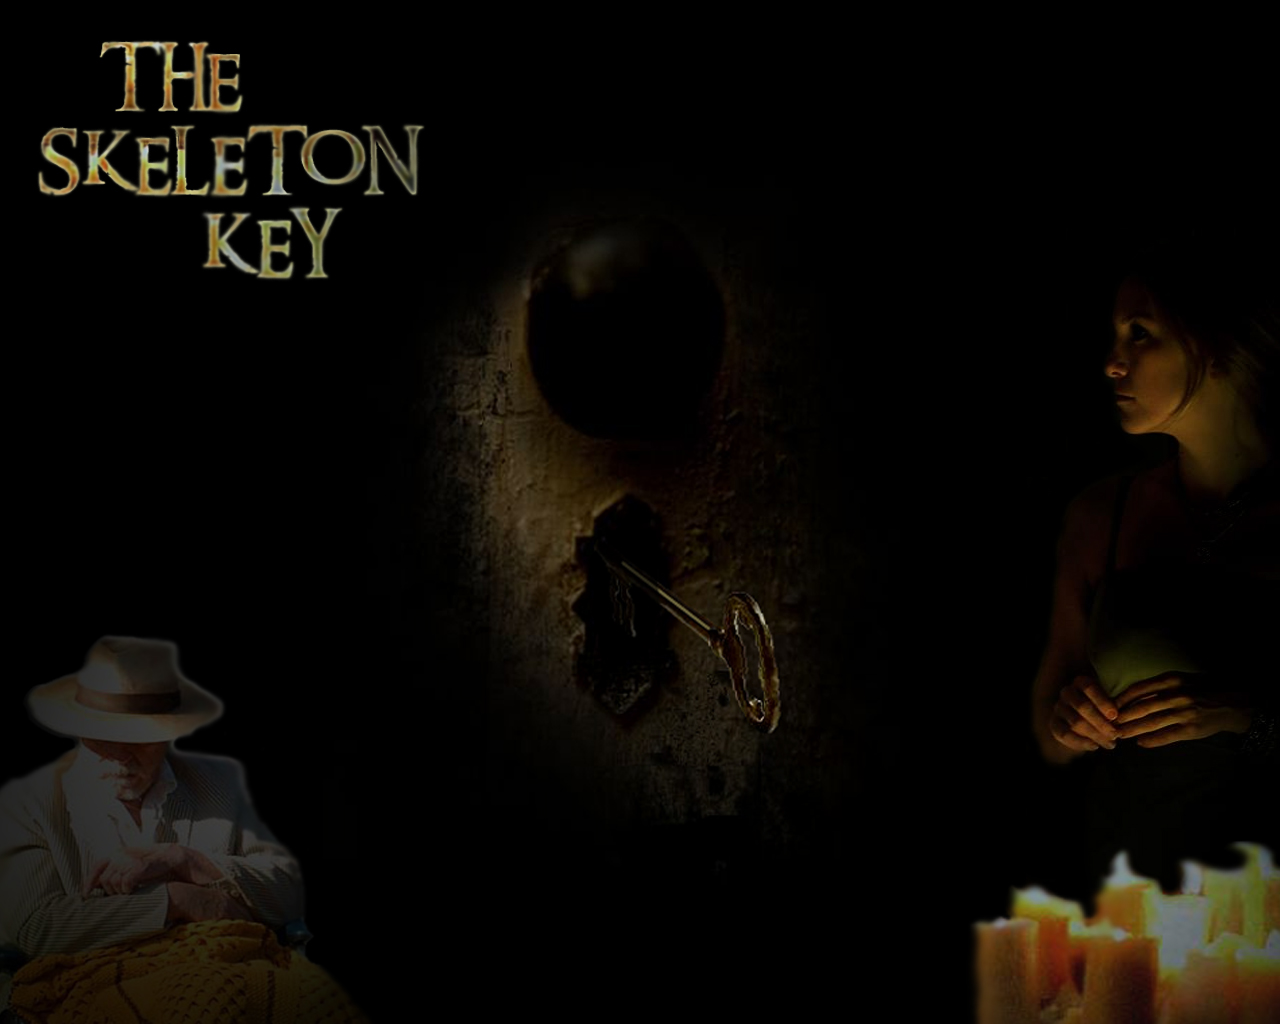 You are viewing the The Skeleton Key wallpaper named The skeleton key 2.